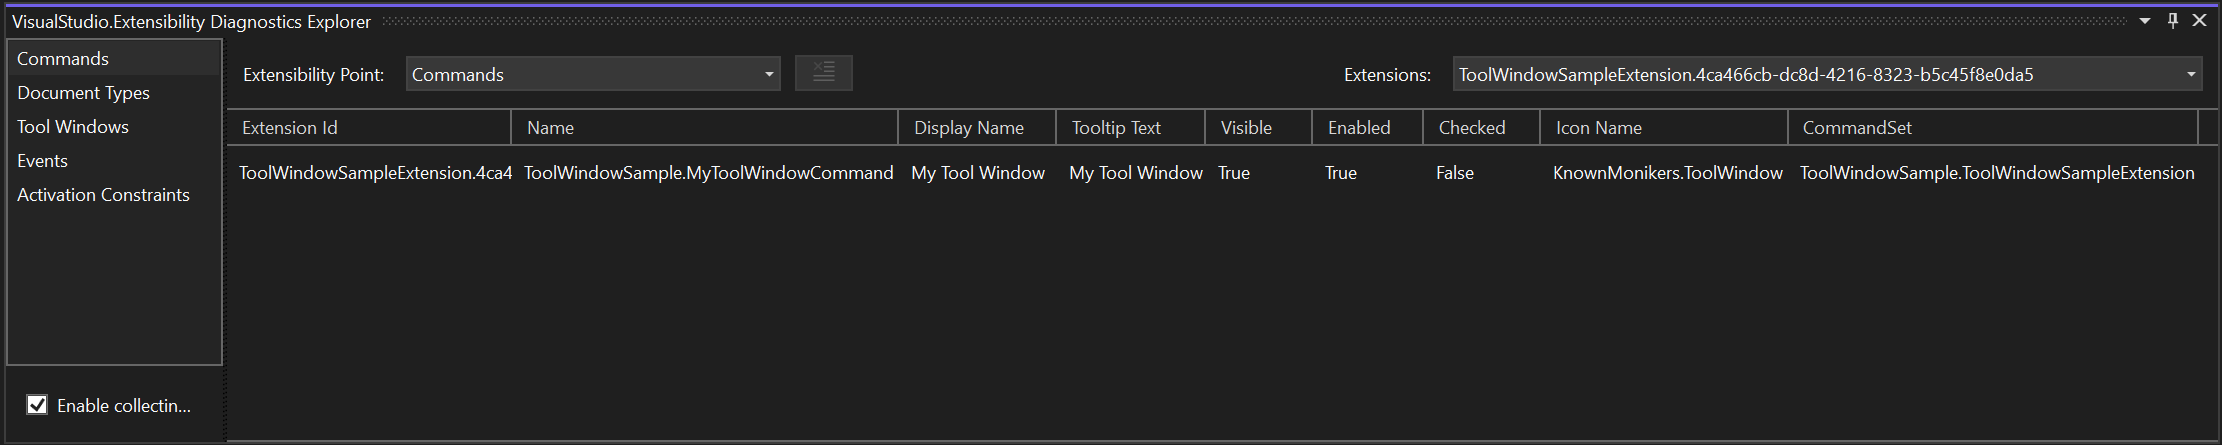 A screenshot of the Commands tab of the VisualStudio.Extensibility Diagnostics Explorer. It shows one command associated with the ToolWindowSampleExtension, along with the metadata for that command.